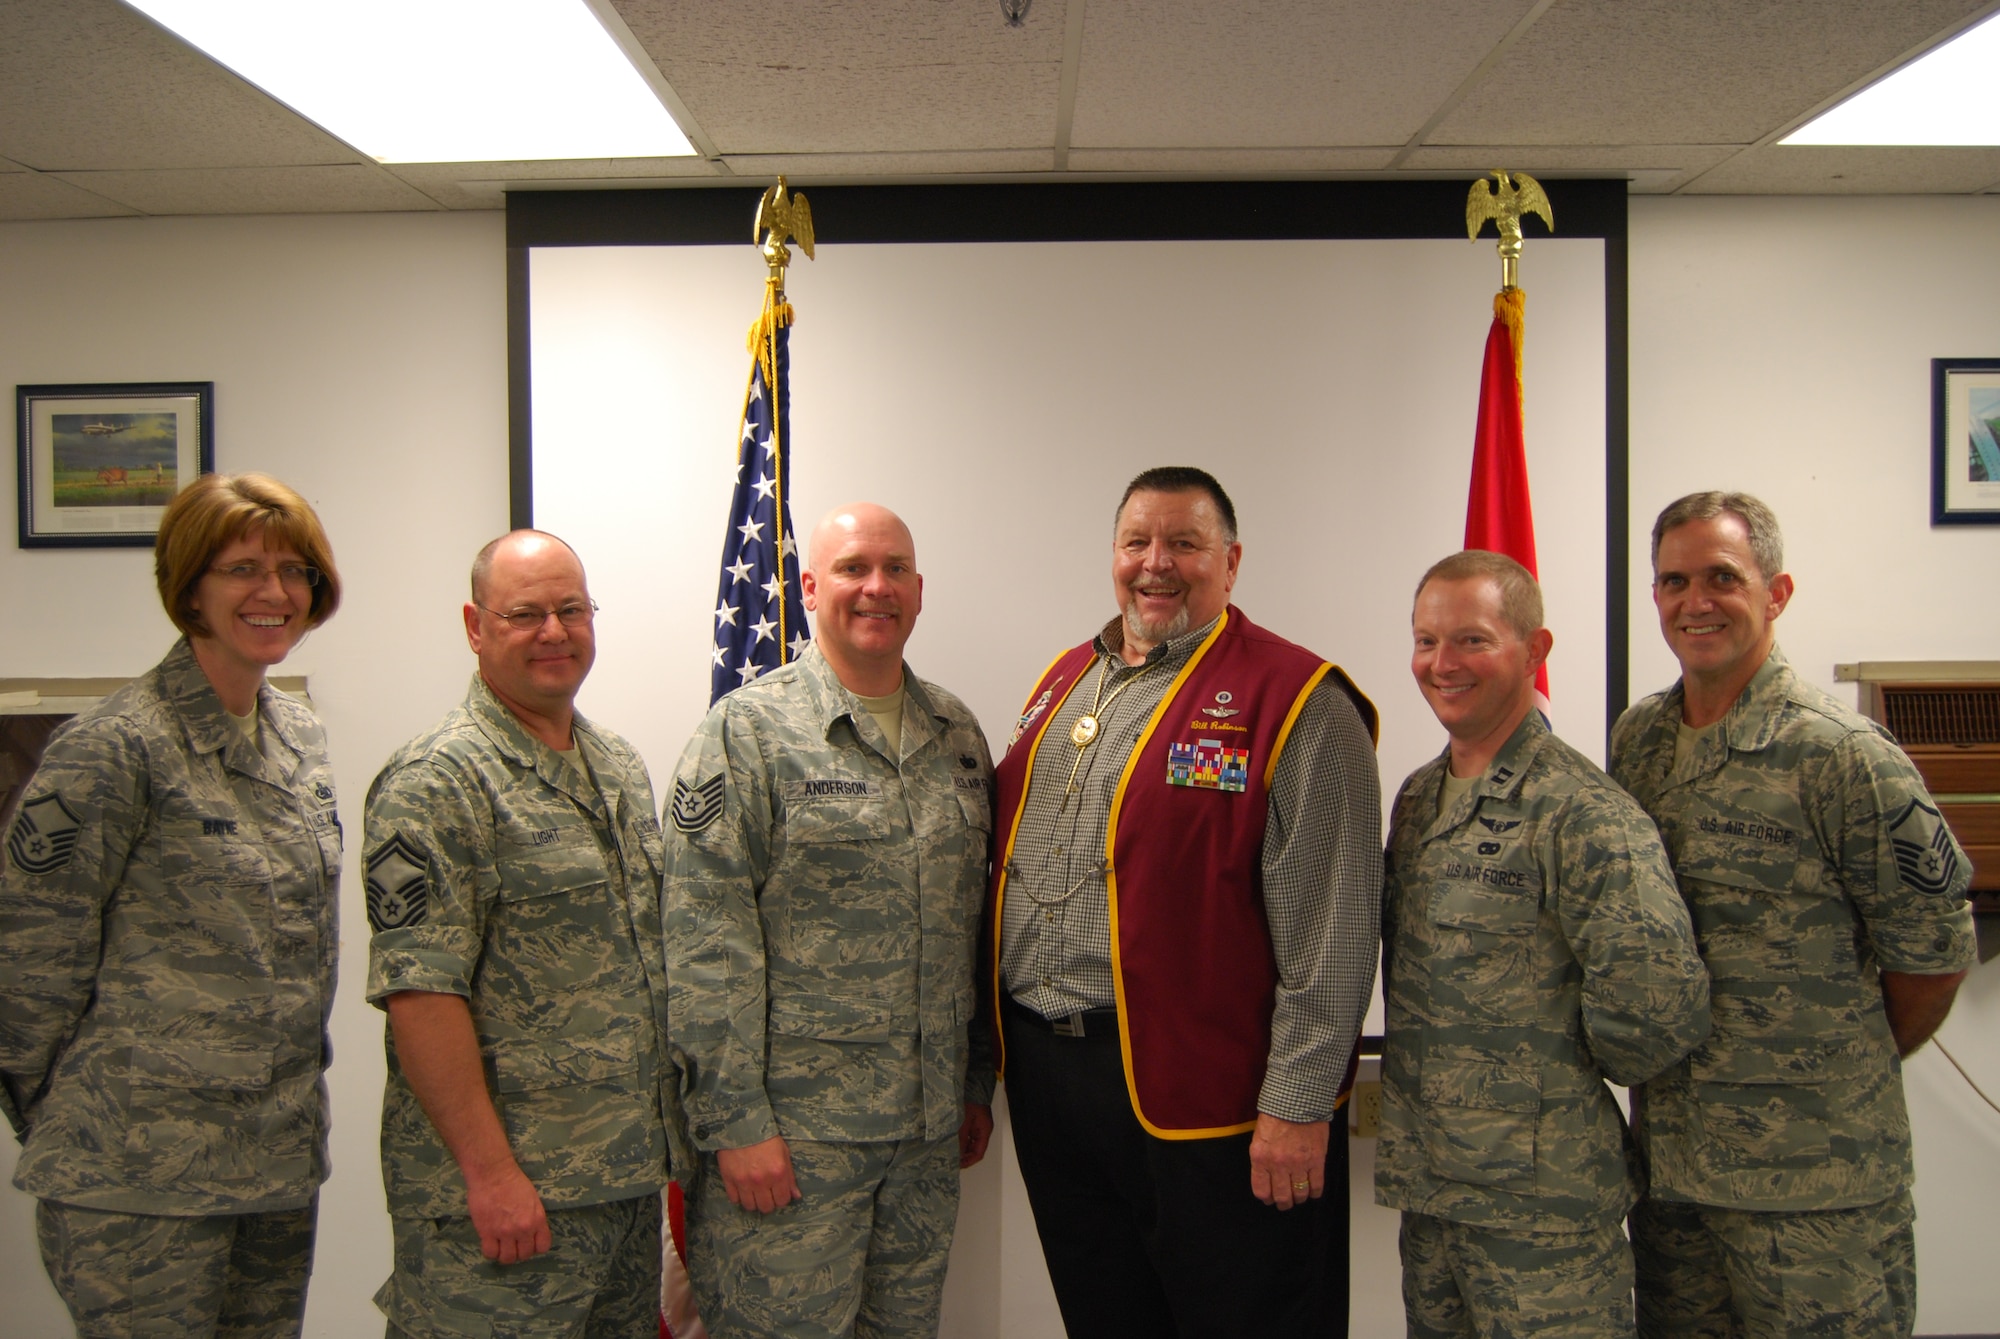 Retired USAF Capt. Bill Robinson poses with members of the 134 Logistics Squadron.  Capt. Robinson holds the distinction of being the longest held prisoner of war in United States history.  (Air National Guard photo by Staff Sgt. Mark Finney, 134 ARW Public Affairs)